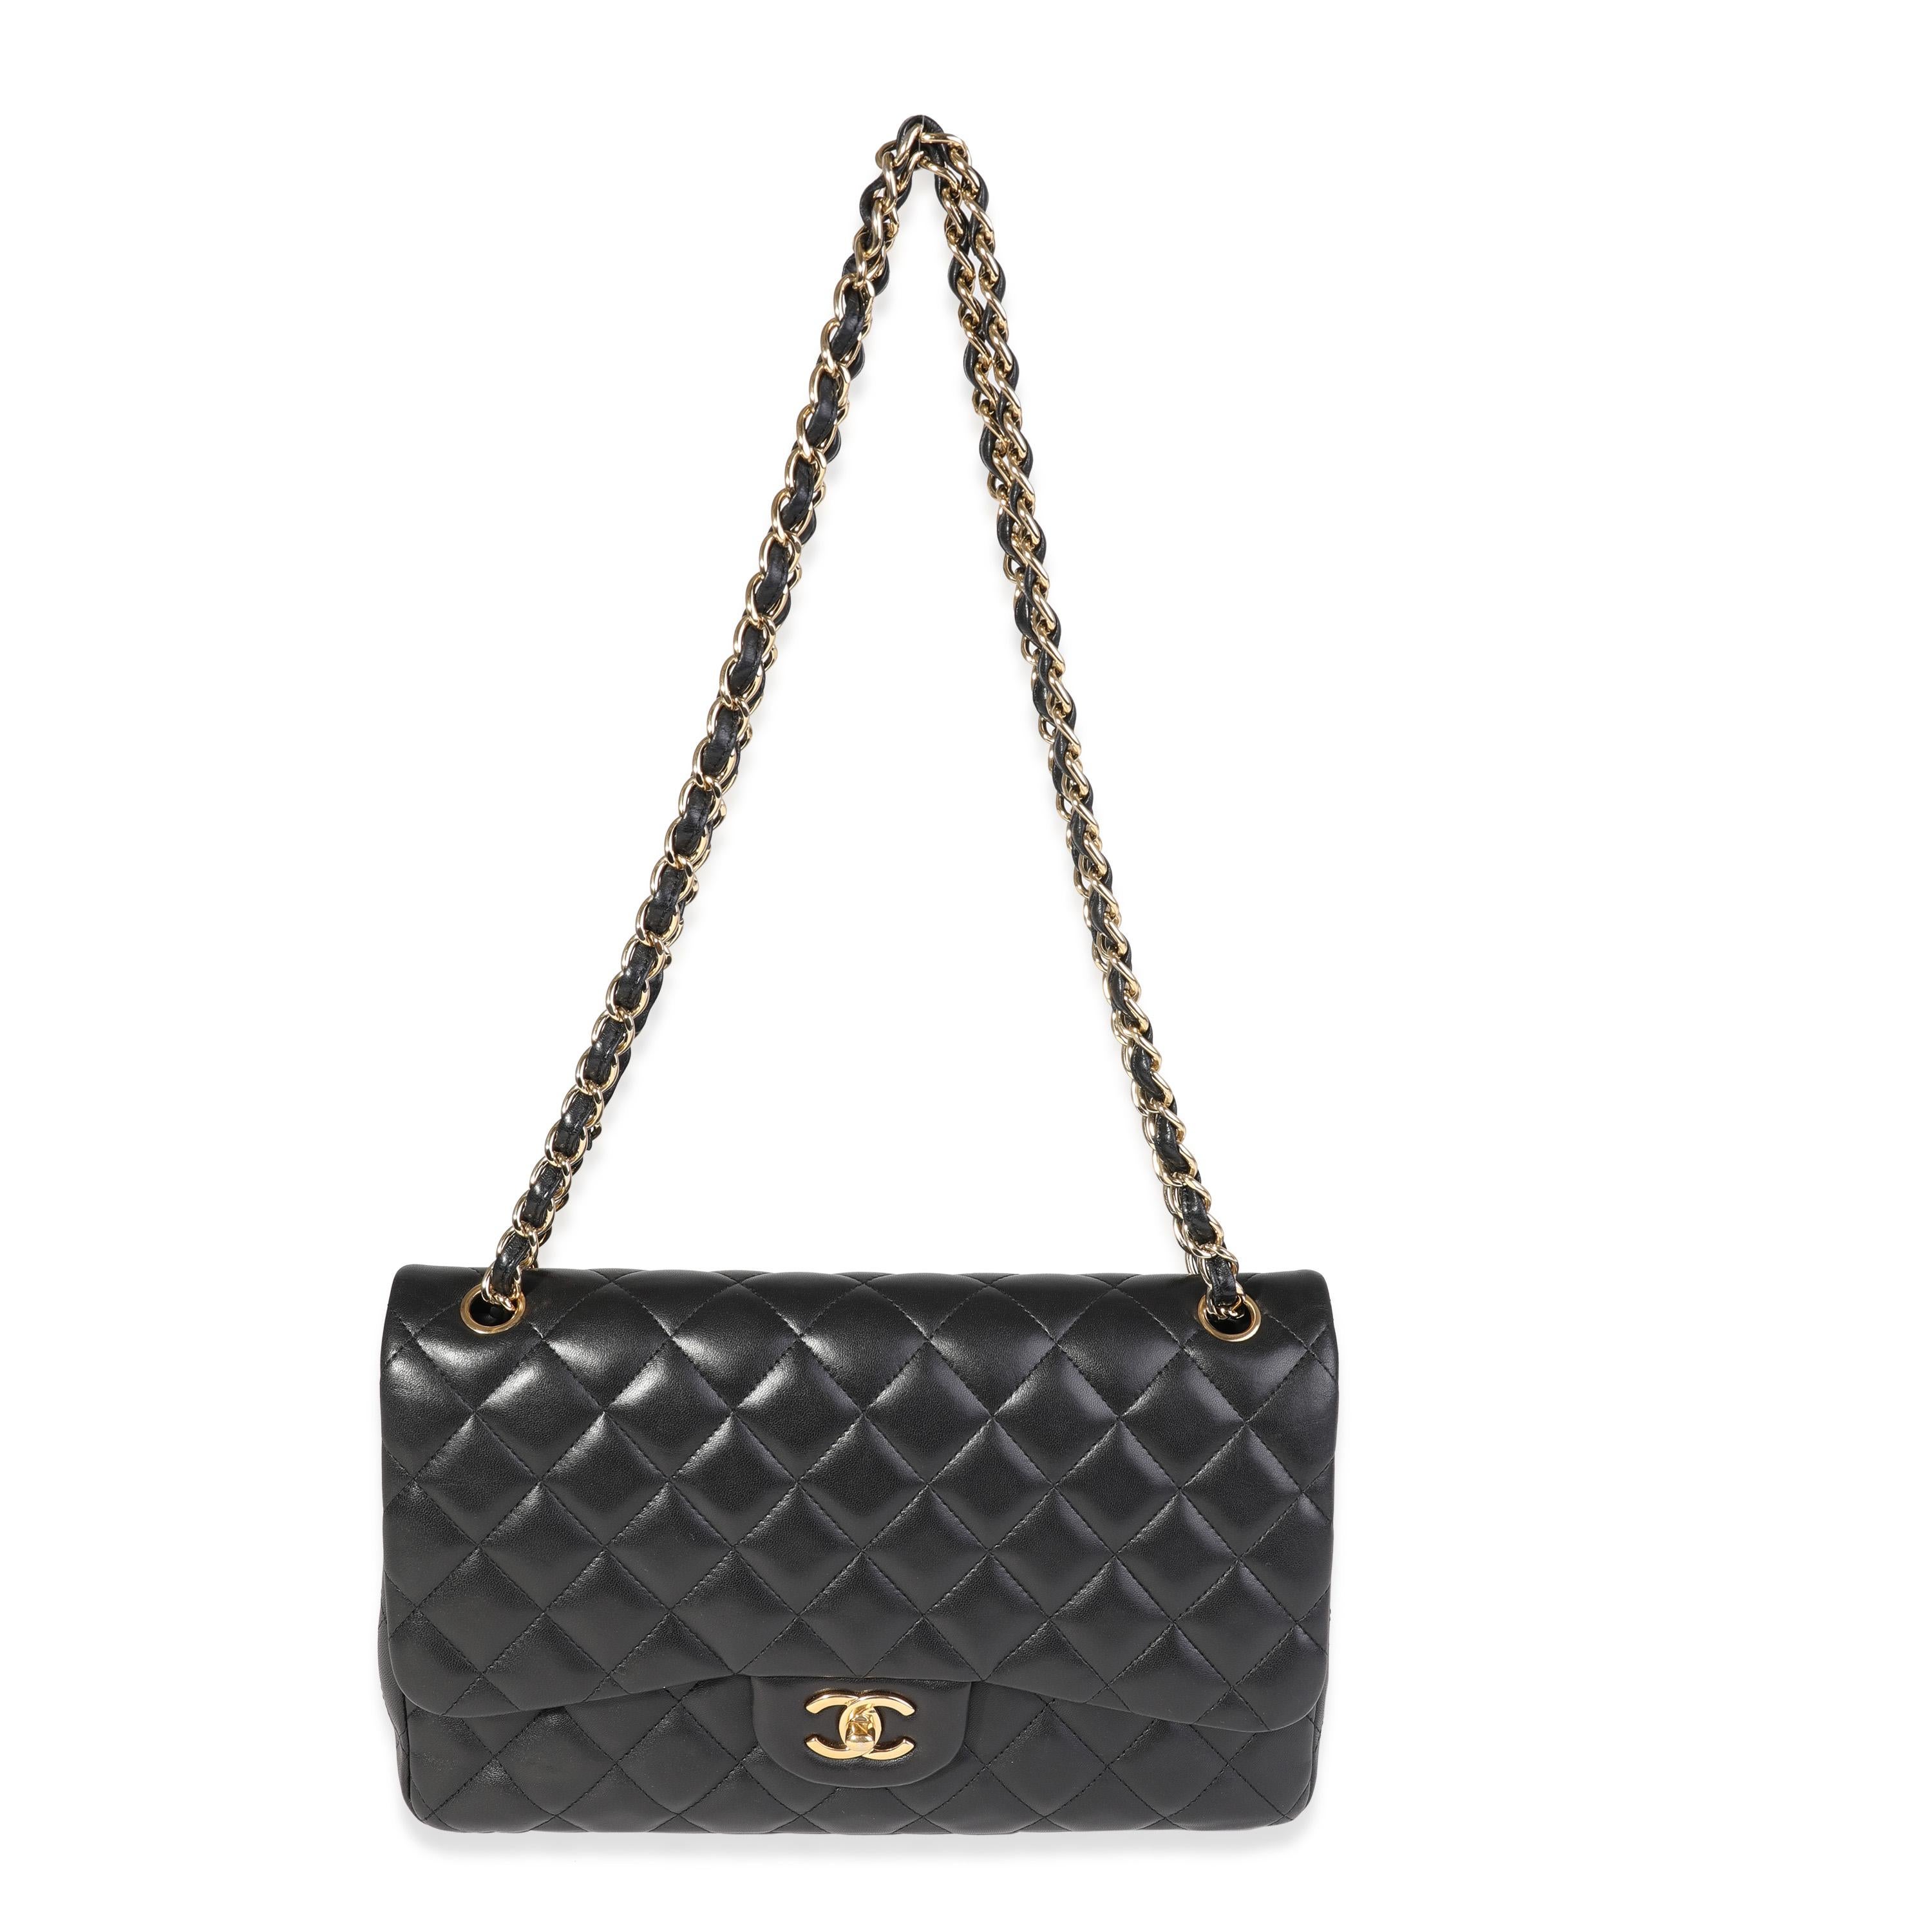 Listing Title: Chanel Black Quilted Lambskin Jumbo Classic Double Flap Bag
SKU: 120923
MSRP: 9500.00
Condition: Pre-owned (3000)
Handbag Condition: Very Good
Condition Comments: Scratches on hardware. Wear to interior.
Brand: Chanel
Model: Classic